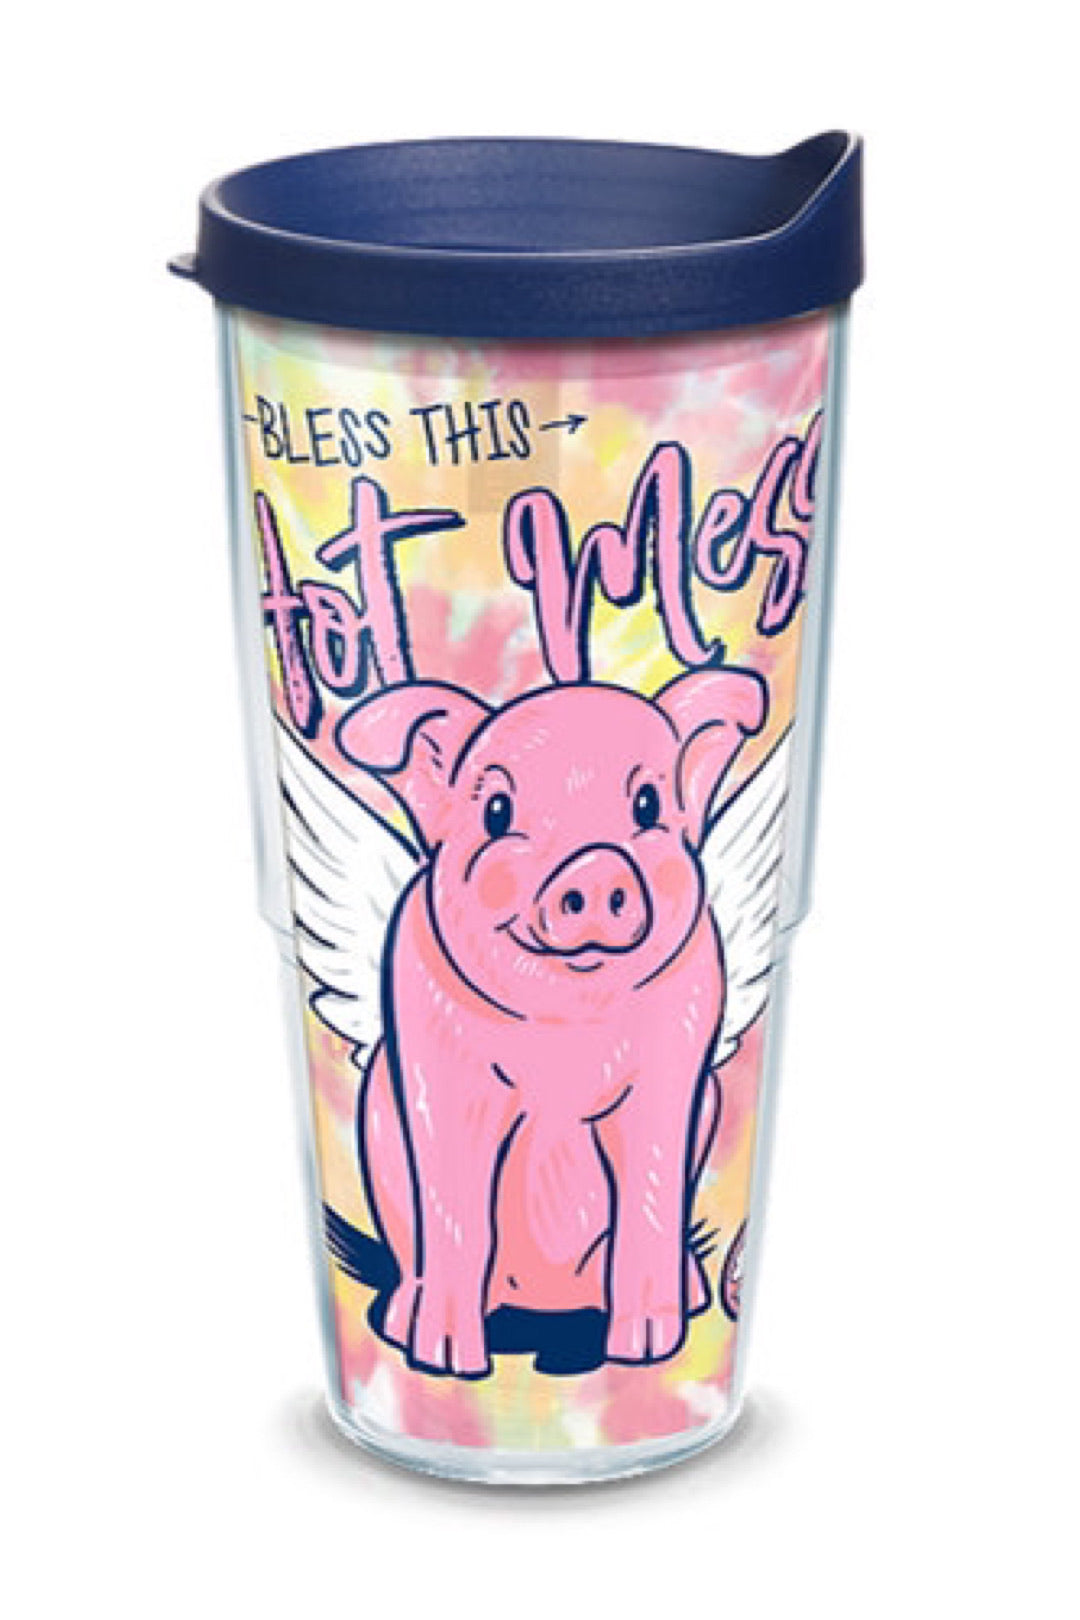 Simply Southern - Hot Mess Pig Plastic Tumblers by Tervis